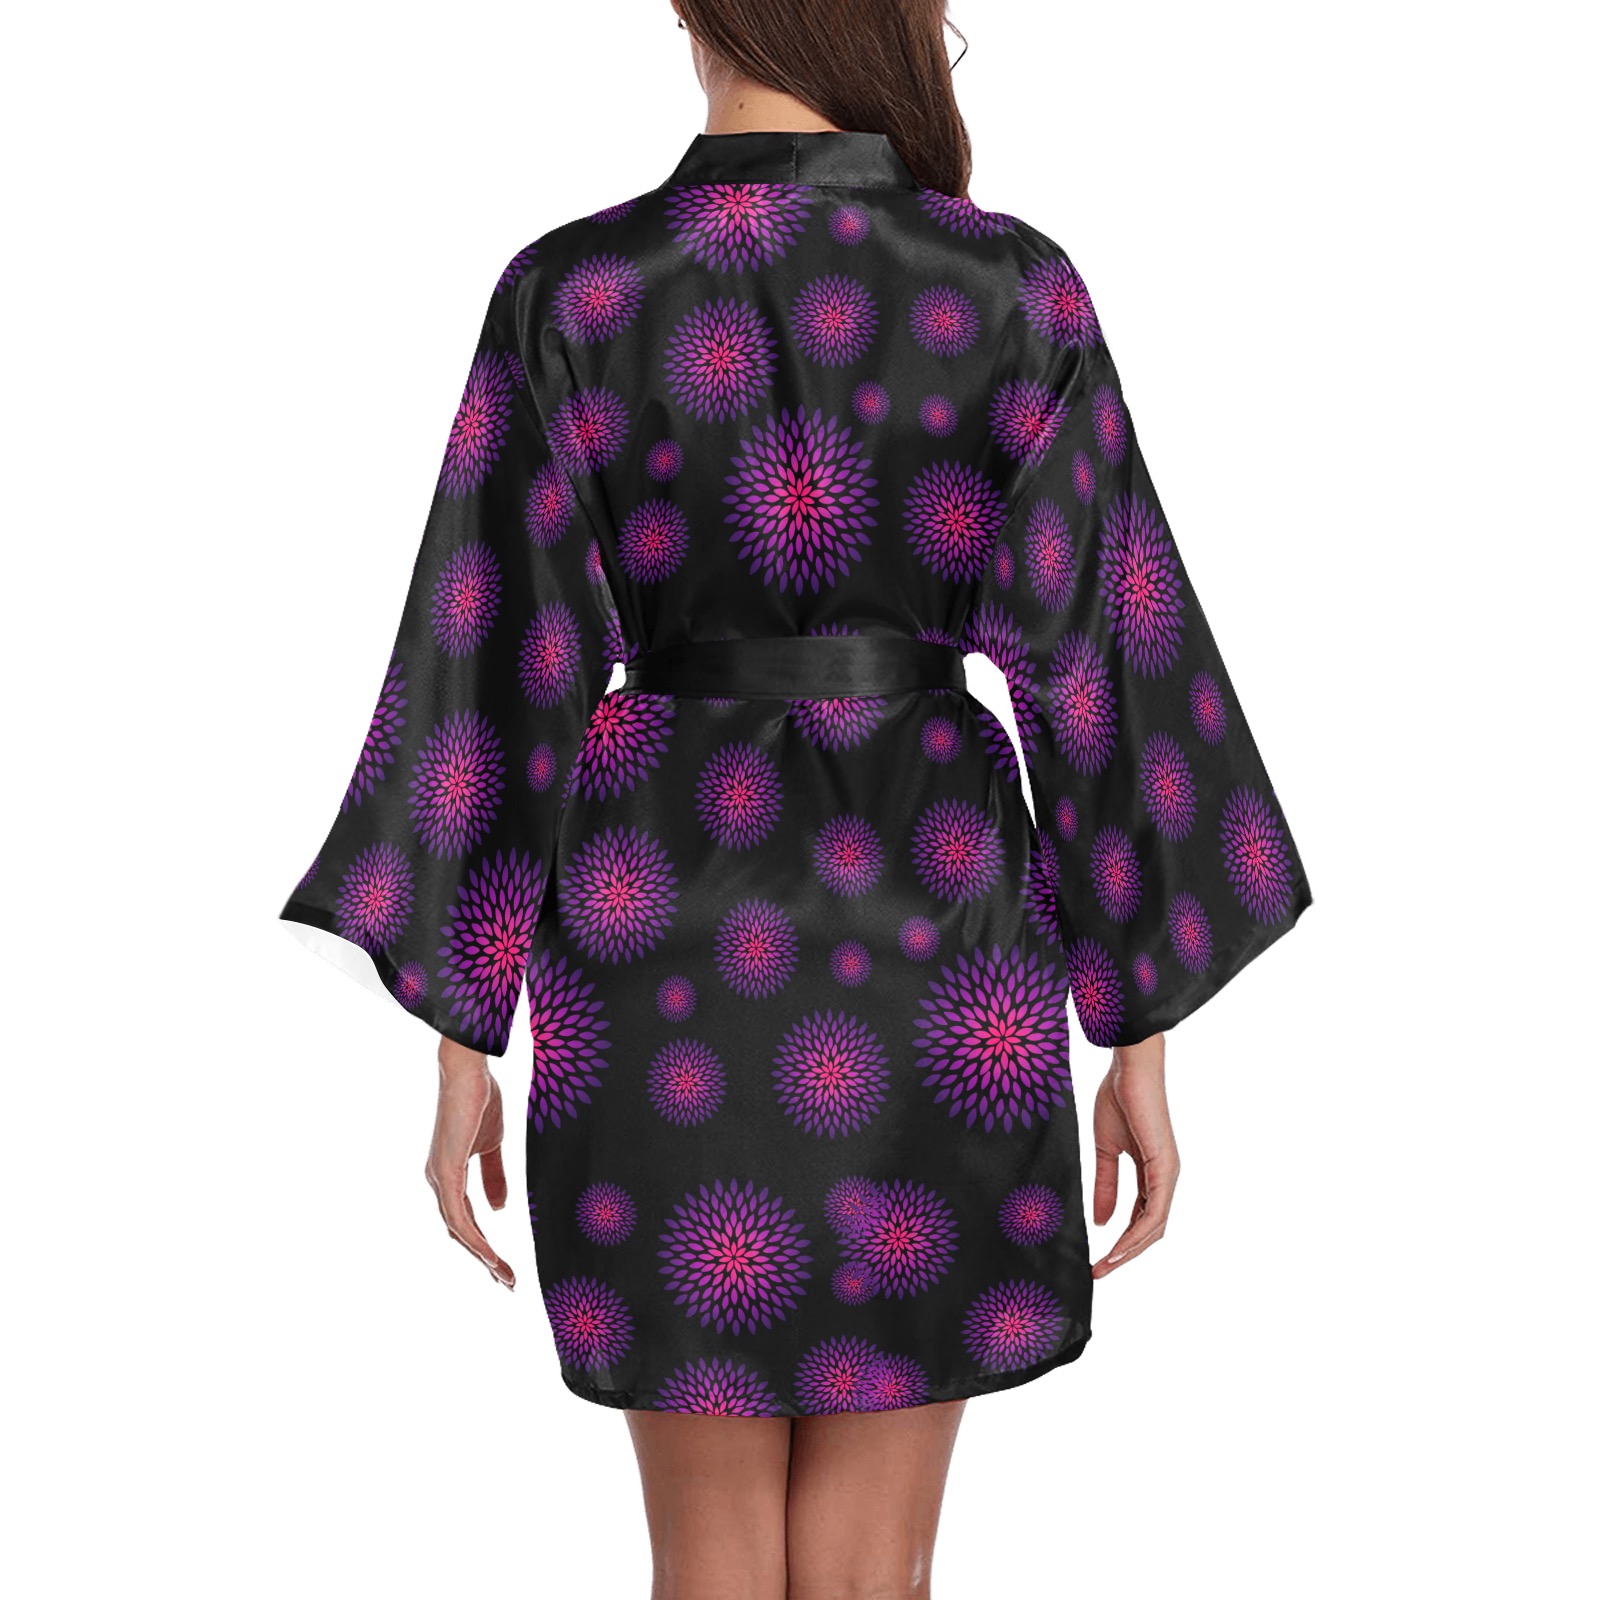 Ô Pink and Violet Zinnia Scatter on Black Long Sleeve Kimono Robe